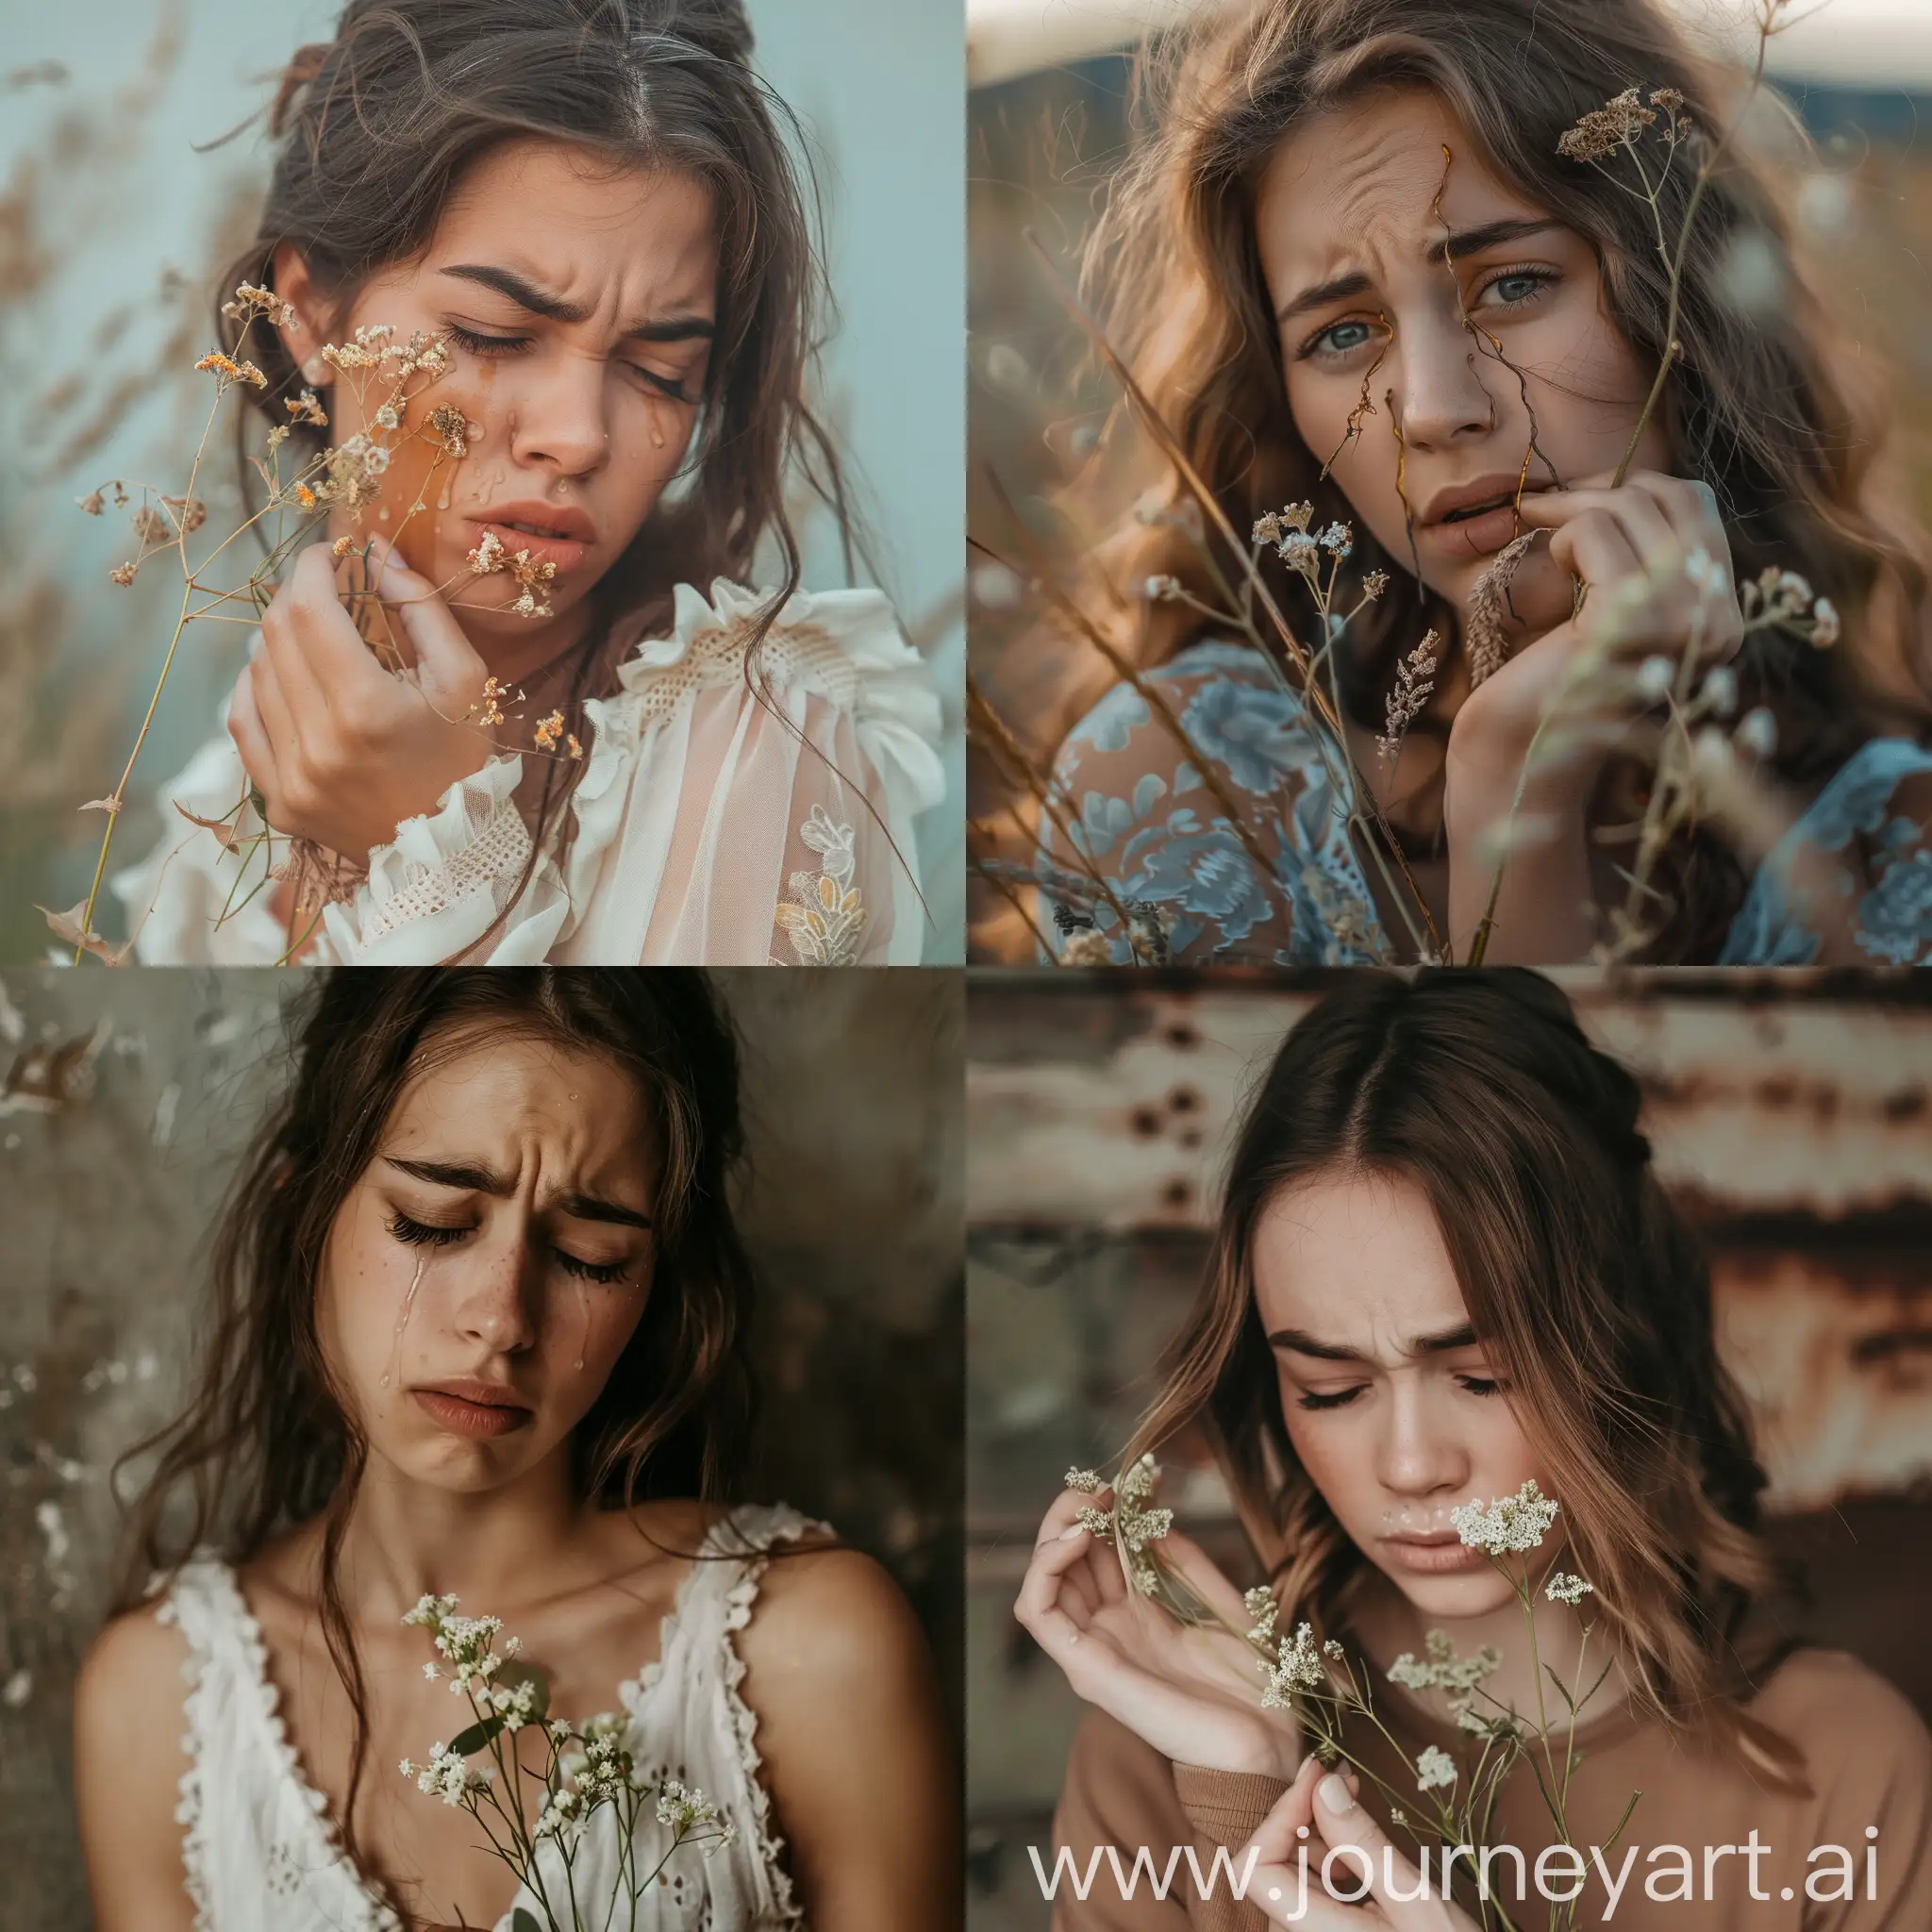 Emotional-Young-Woman-Holding-Dying-Flowers